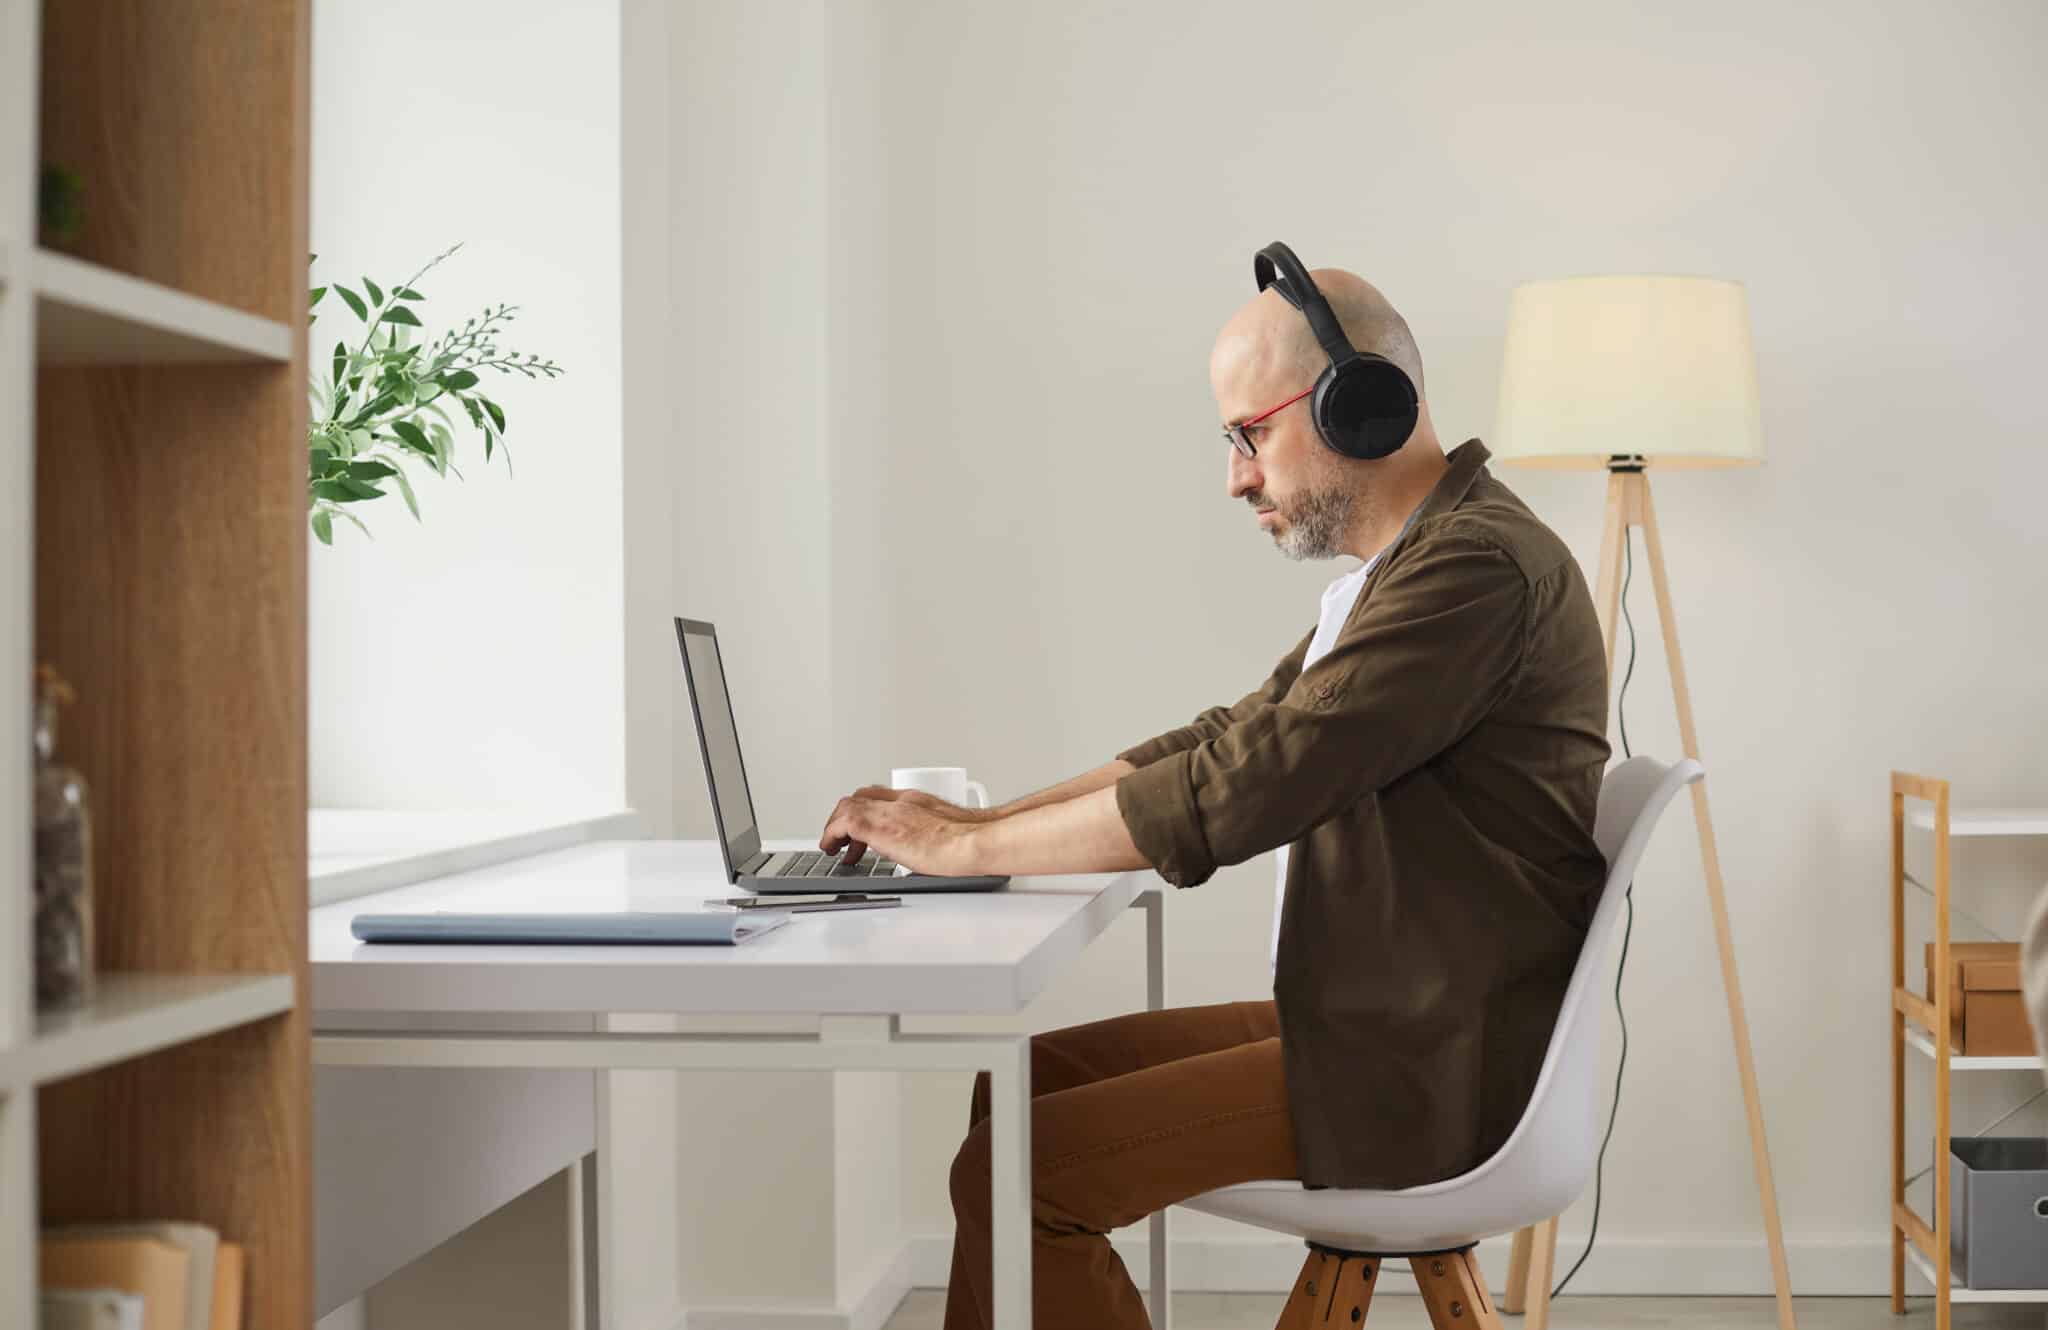 Athreon transcriptionist with headphones focuses on a transcription project on his laptop at home.